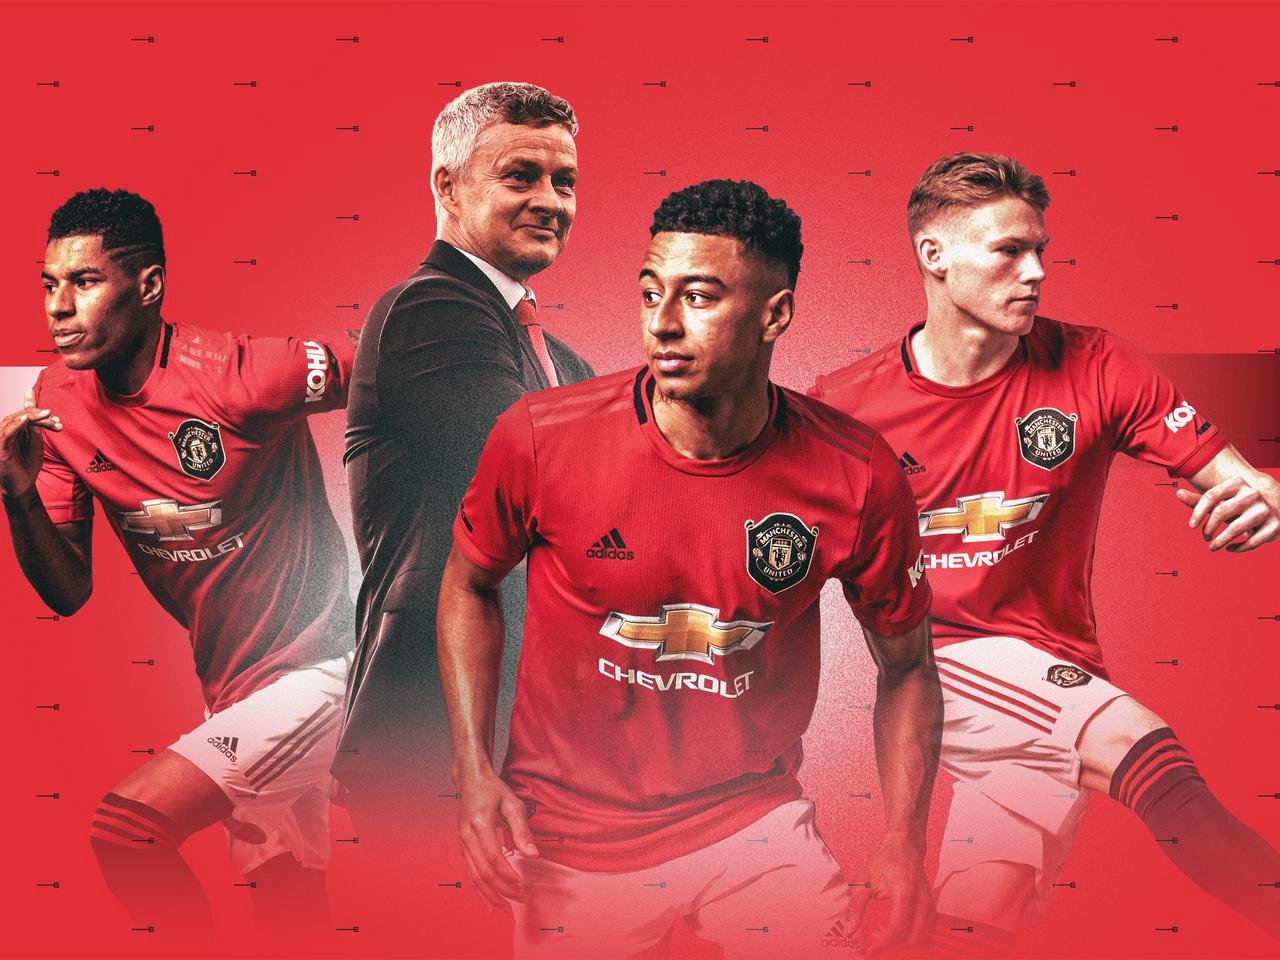 Manchester United Players 2020 Wallpapers - Wallpaper Cave